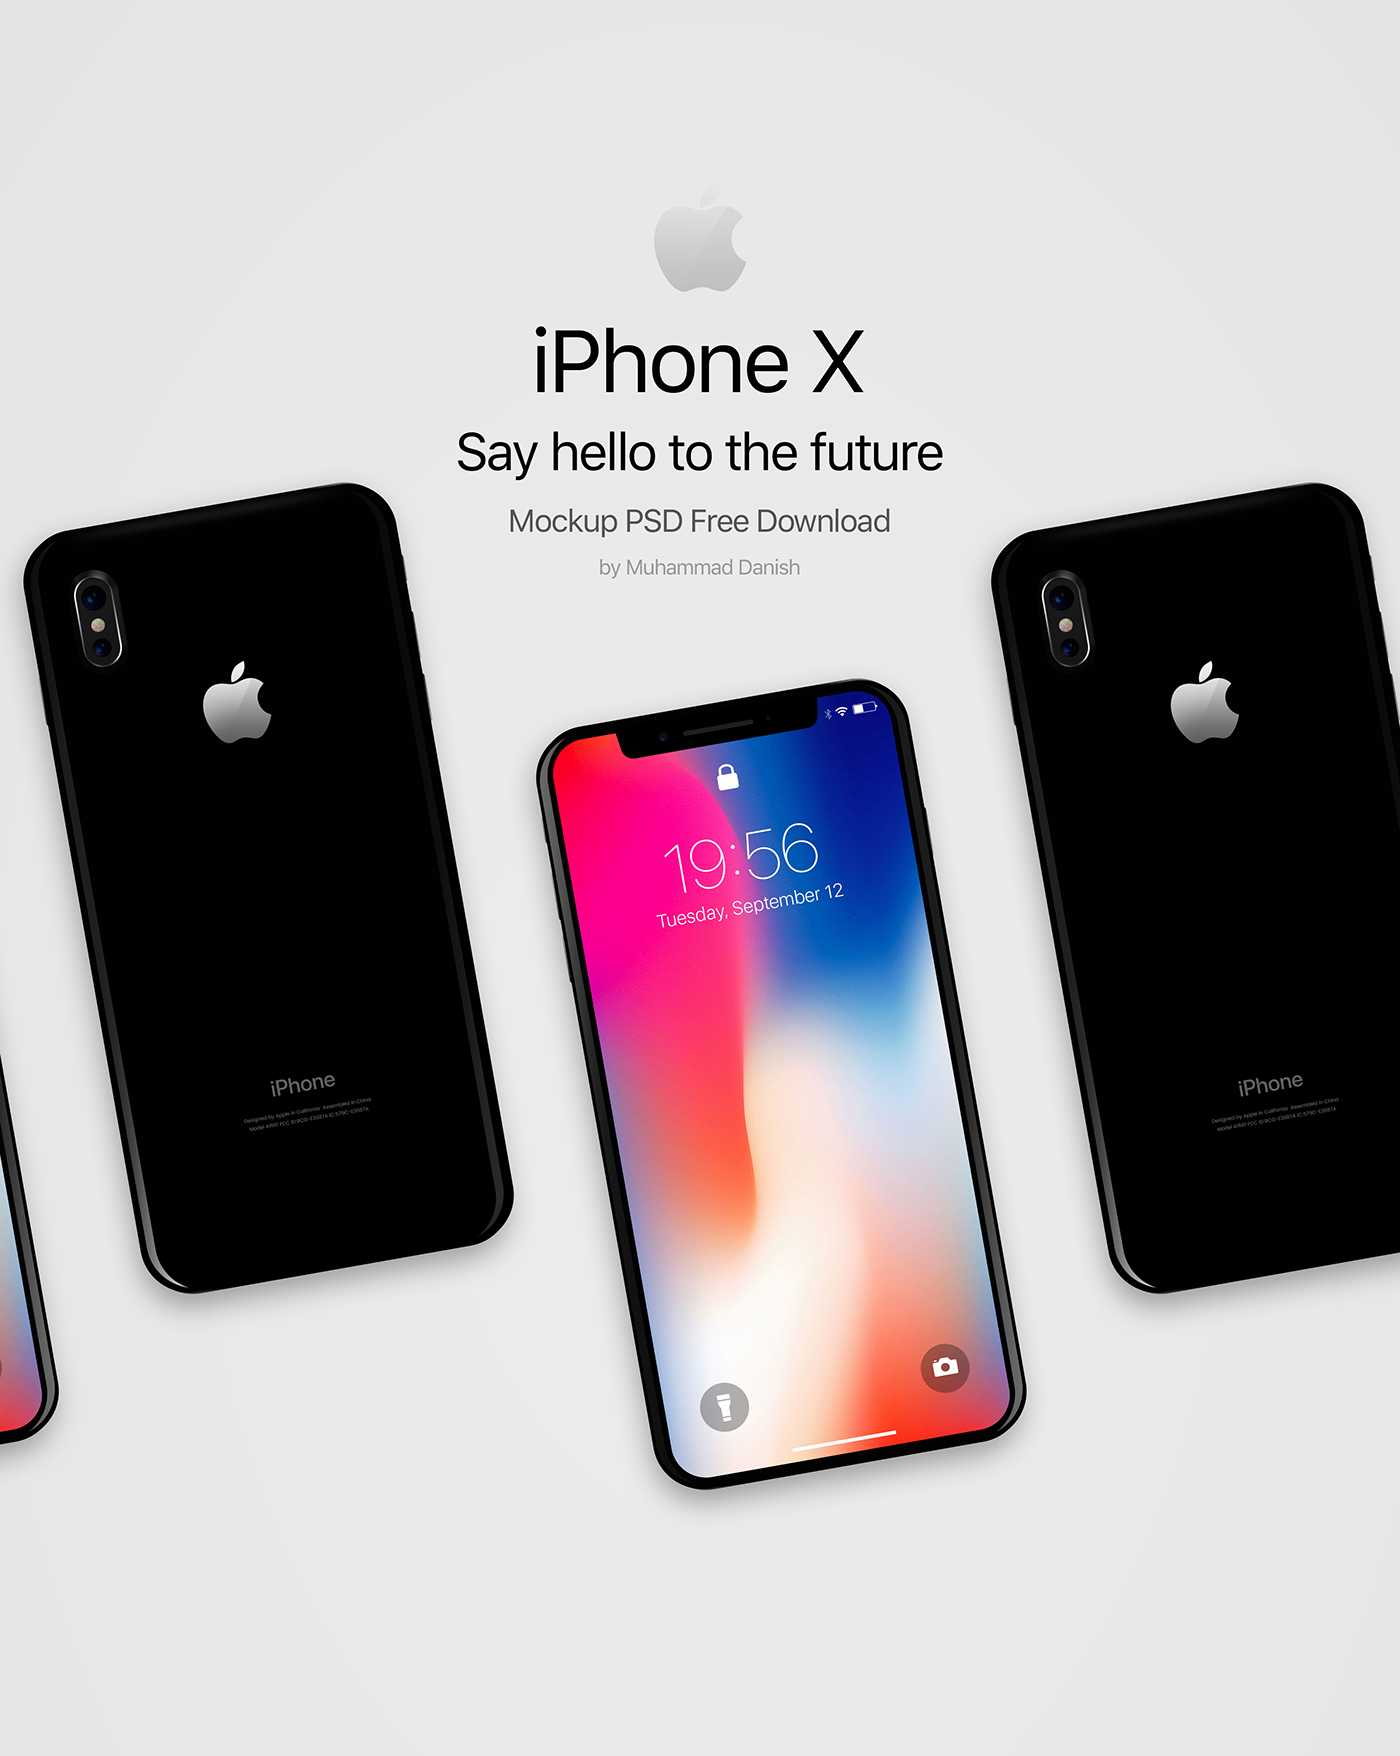 iPhone X Mockup PSD - Free Download on Behance